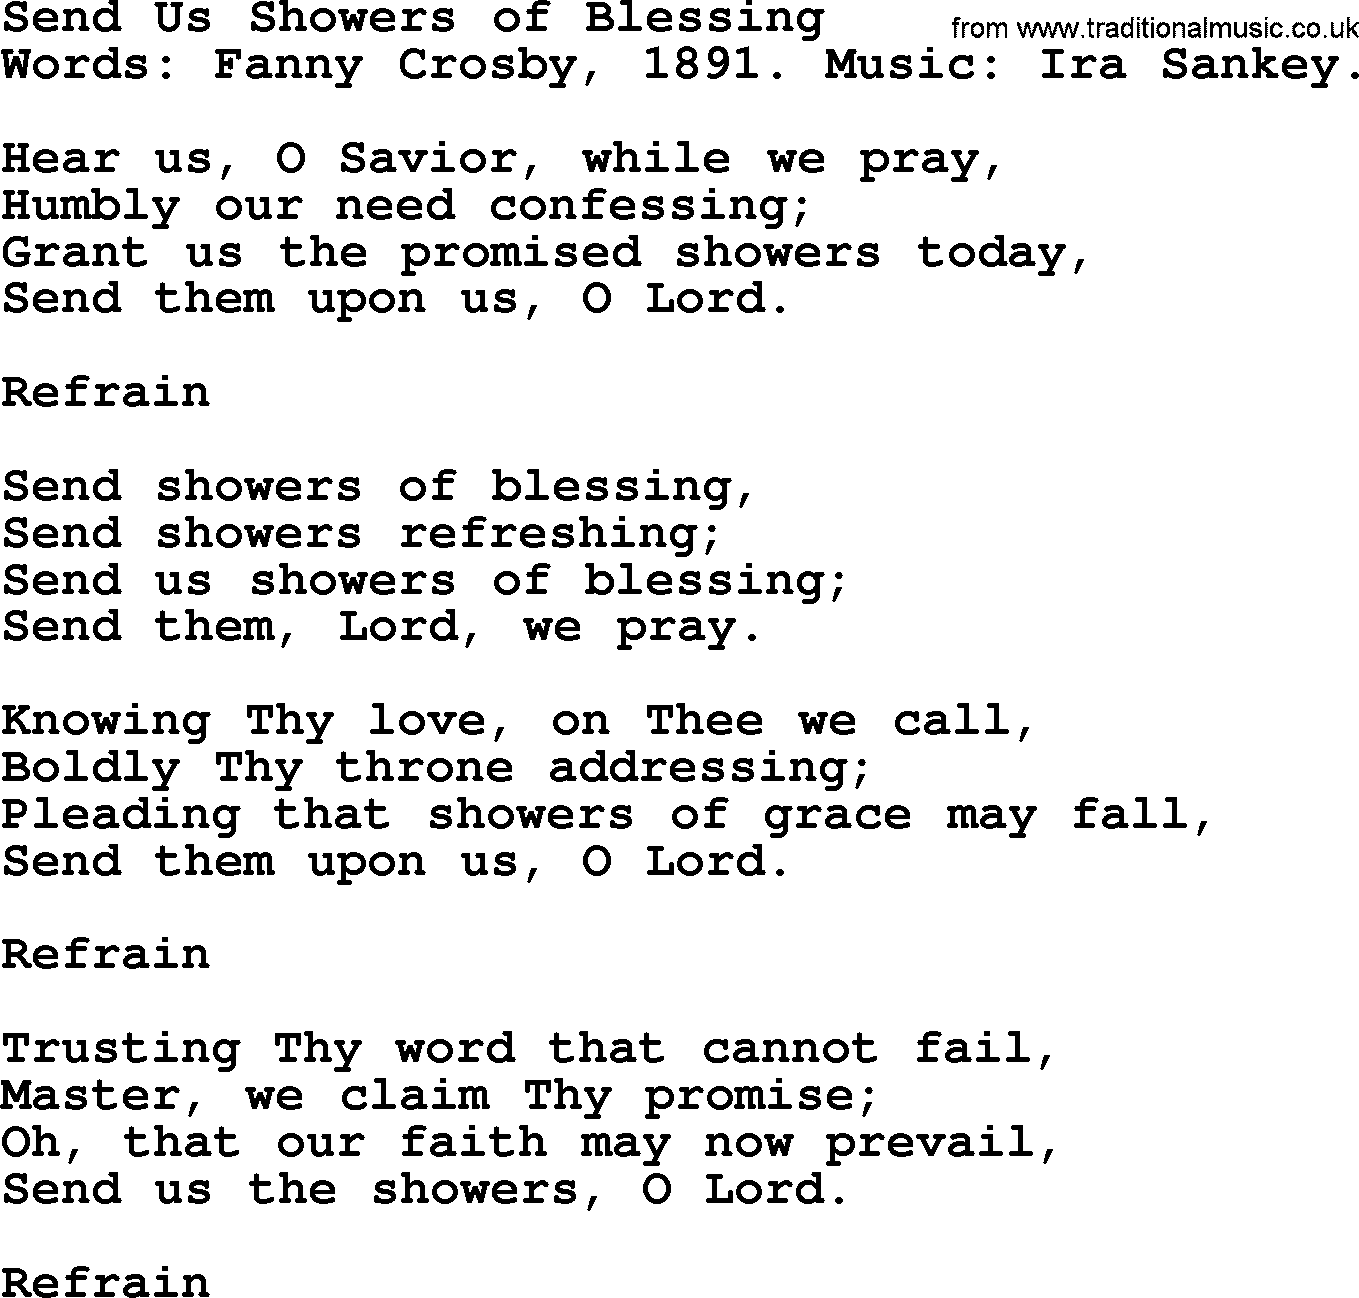 Fanny Crosby song: Send Us Showers Of Blessing, lyrics